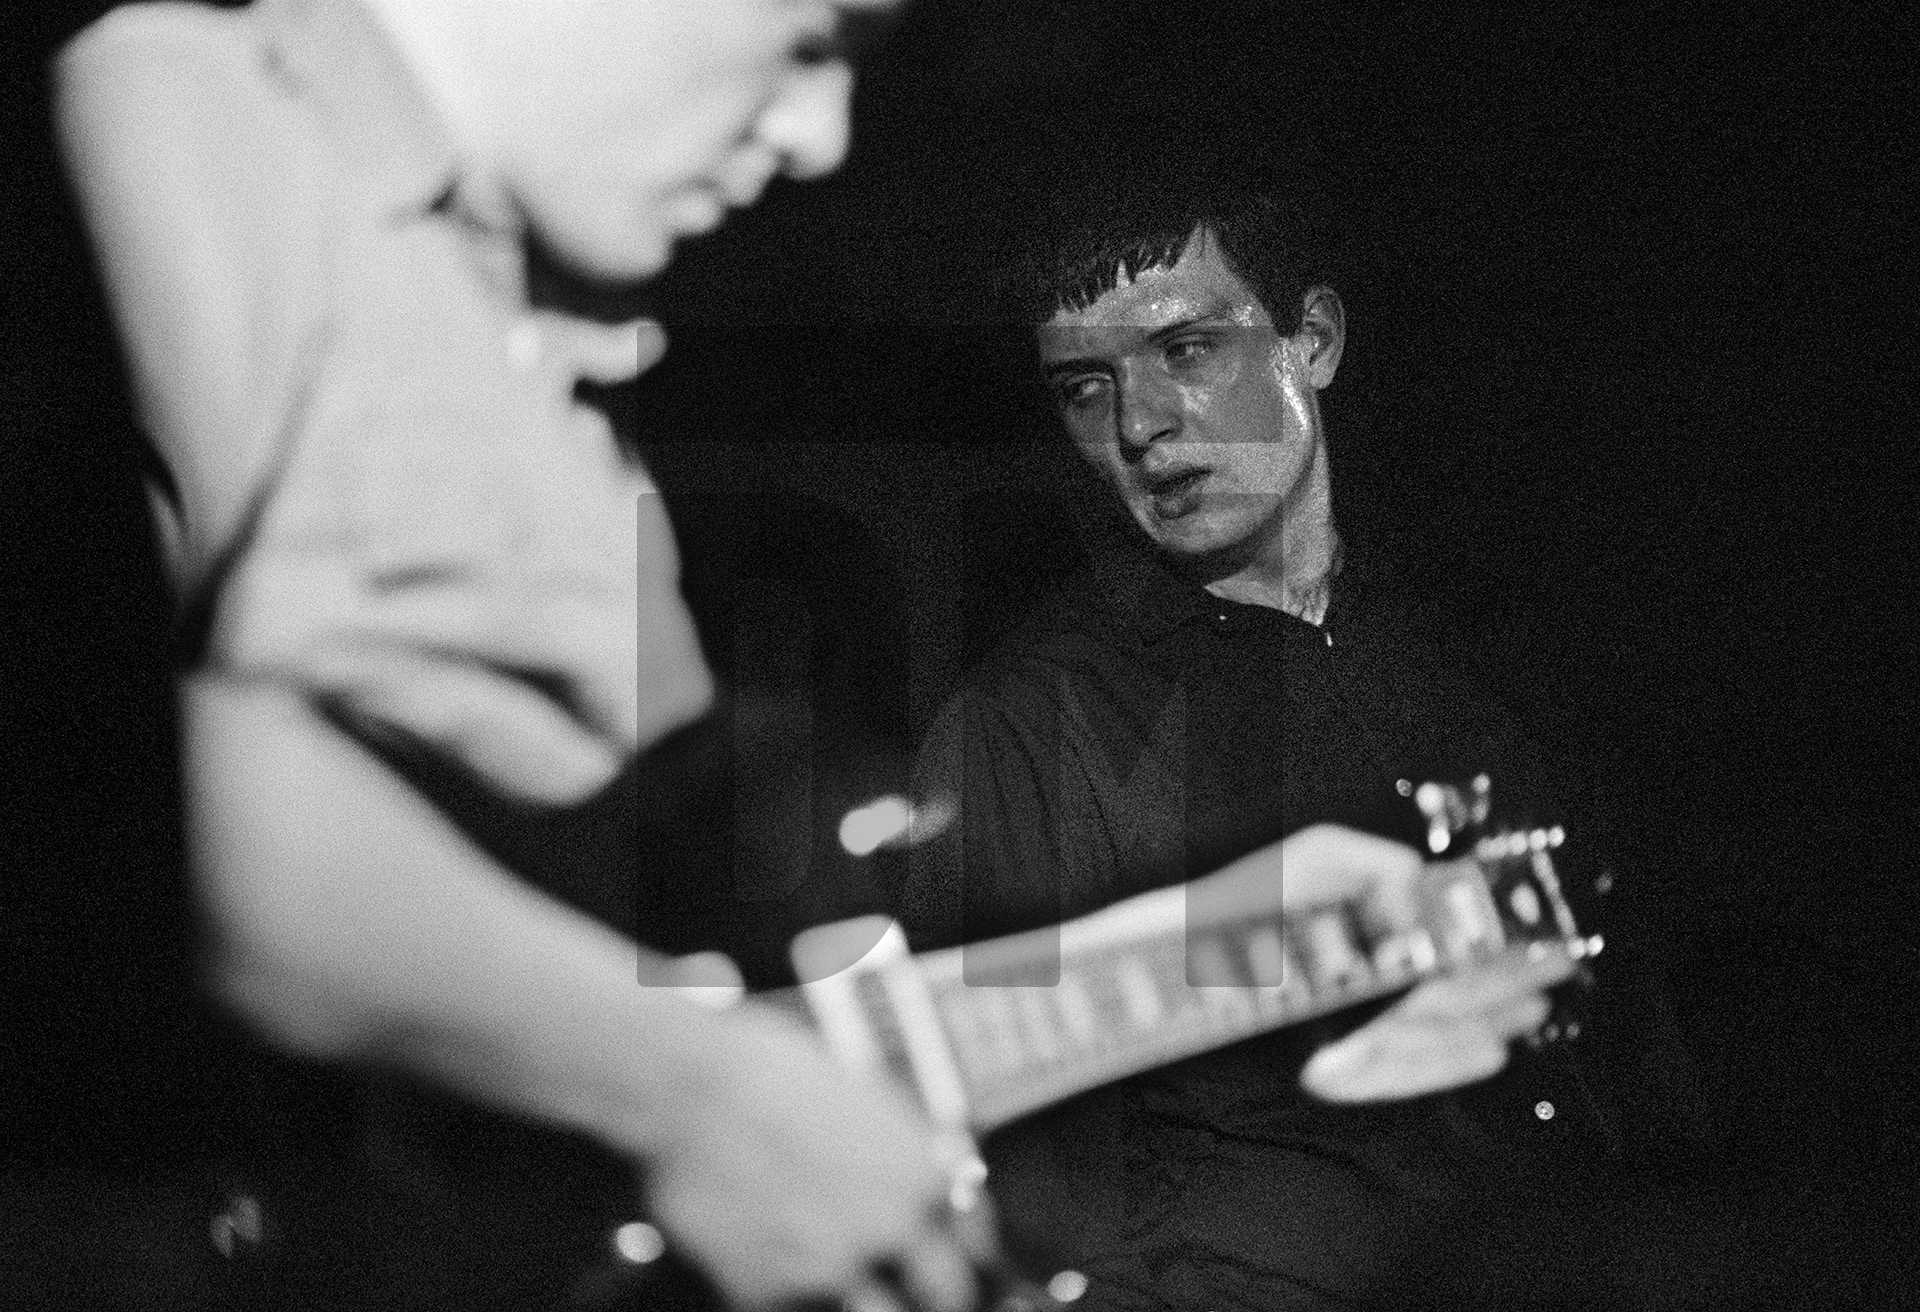 Bernard Sumner and Ian Curtis of Joy Division, on stage, New Osbourne Club, Miles Platting, Manchester. 7 February 1980 by Daniel Meadows